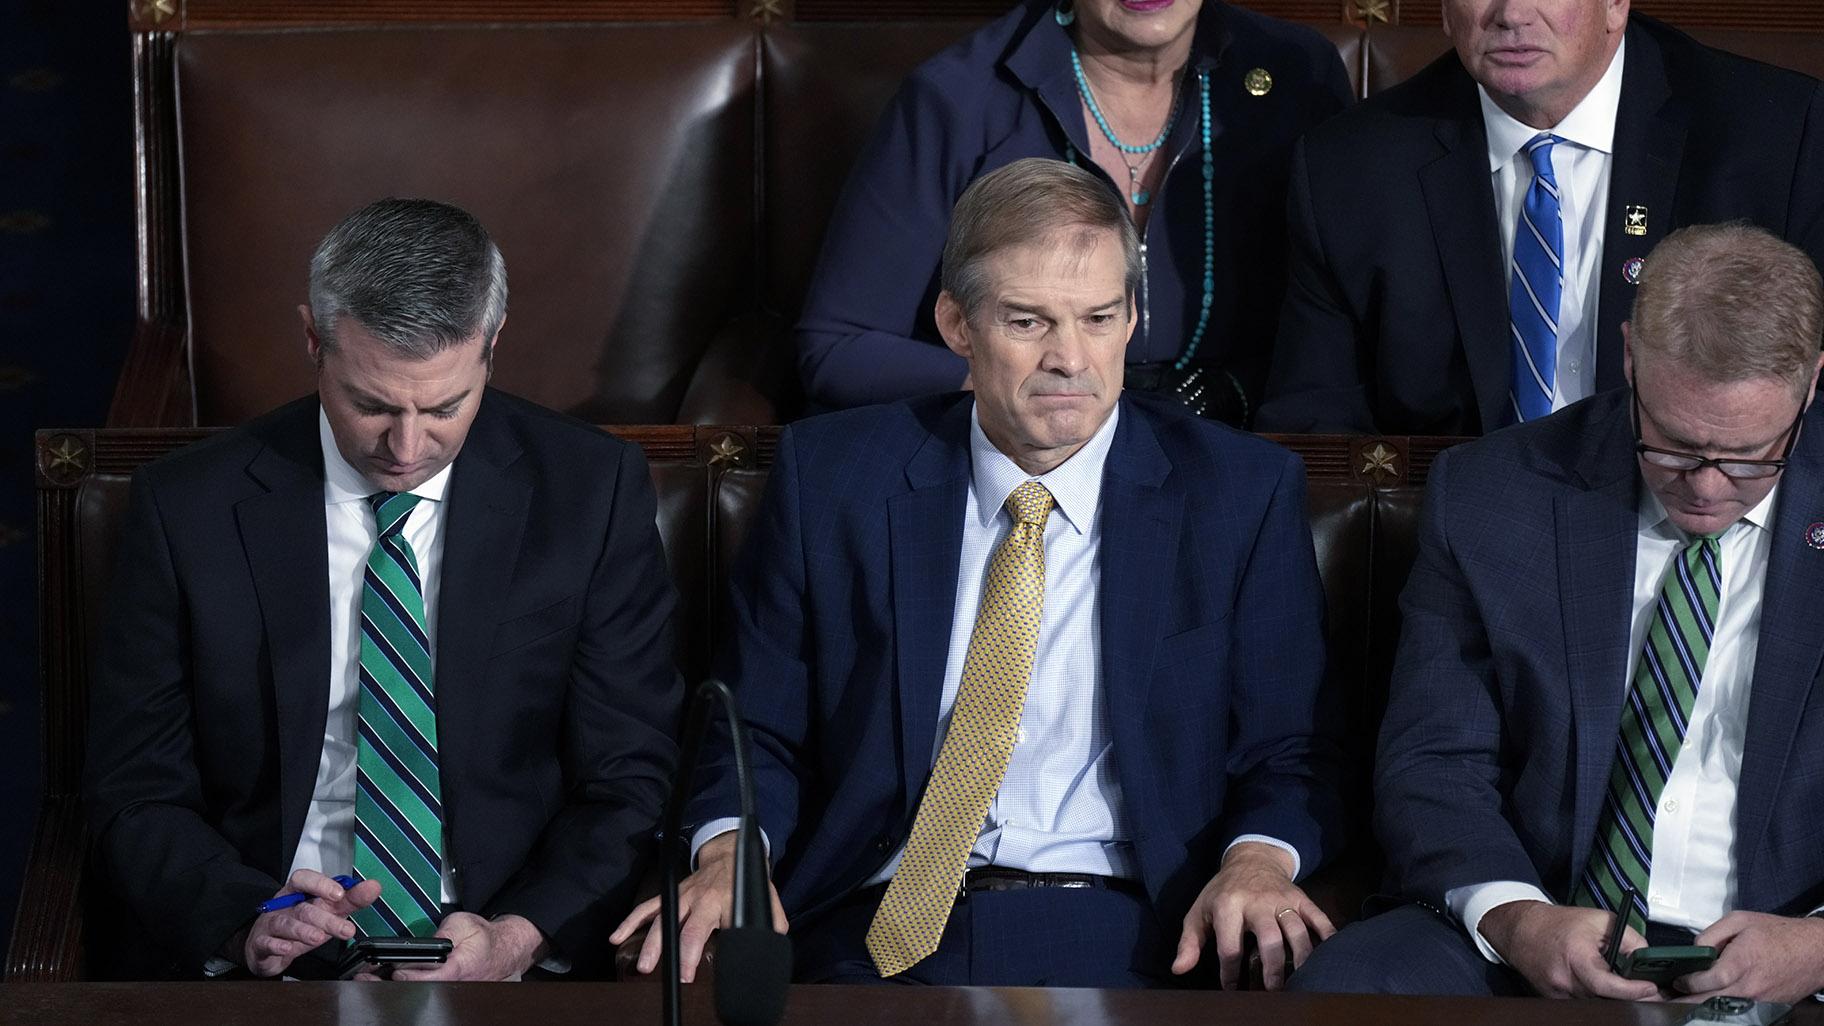 Rep. Jim Jordan, R-Ohio, center, and others, look on as the vote is counted for a third ballot to elect a speaker of the House, at the Capitol in Washington, Friday, Oct. 20, 2023. (AP Photo / J. Scott Applewhite)